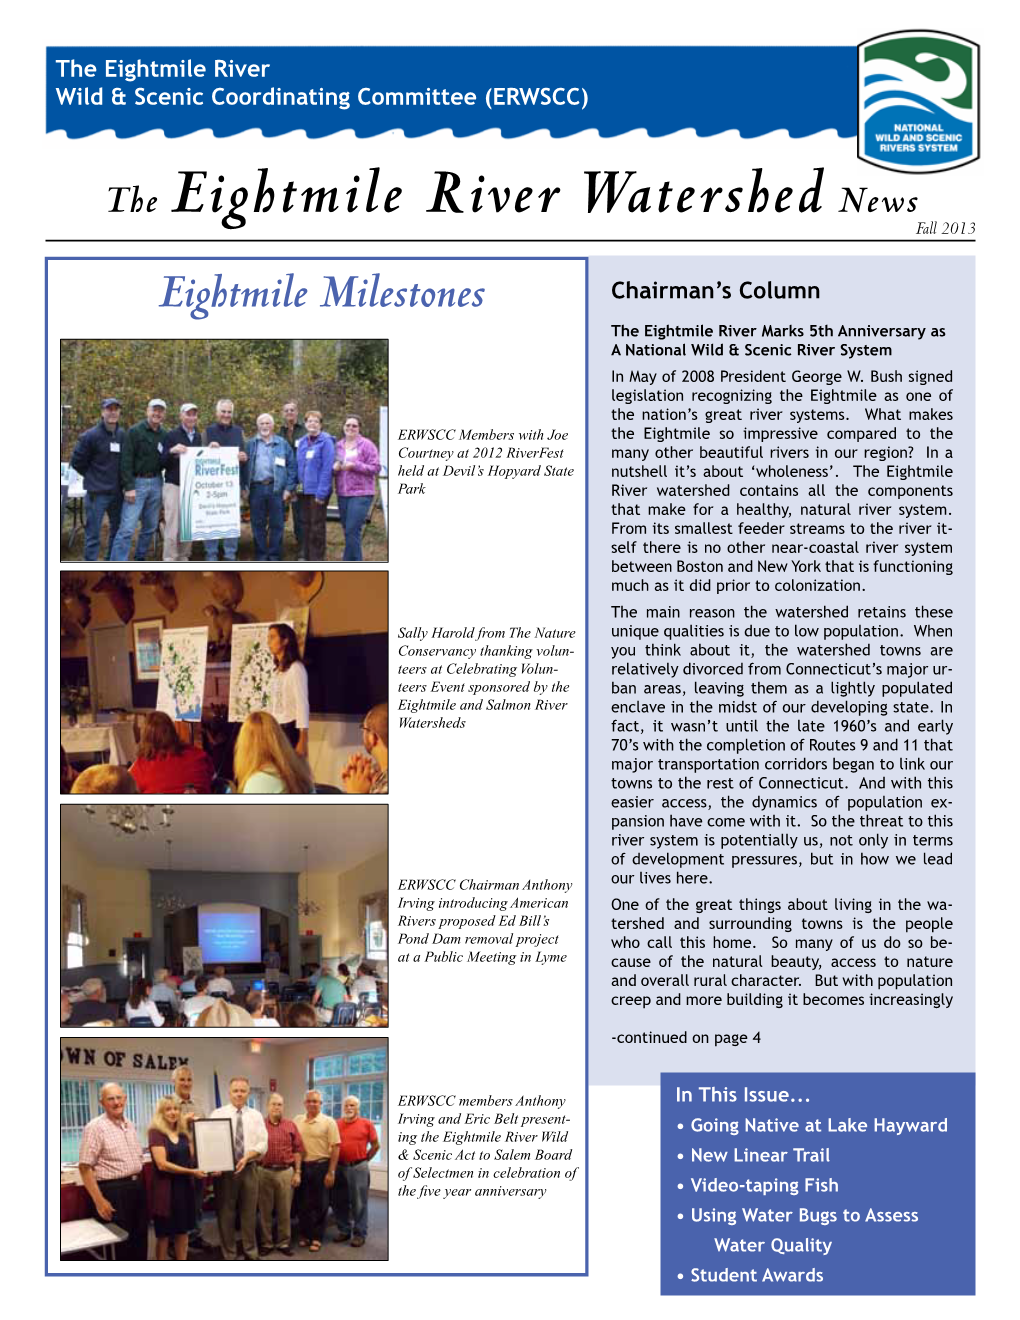 The Eightmile River Watershed News Fall 2013